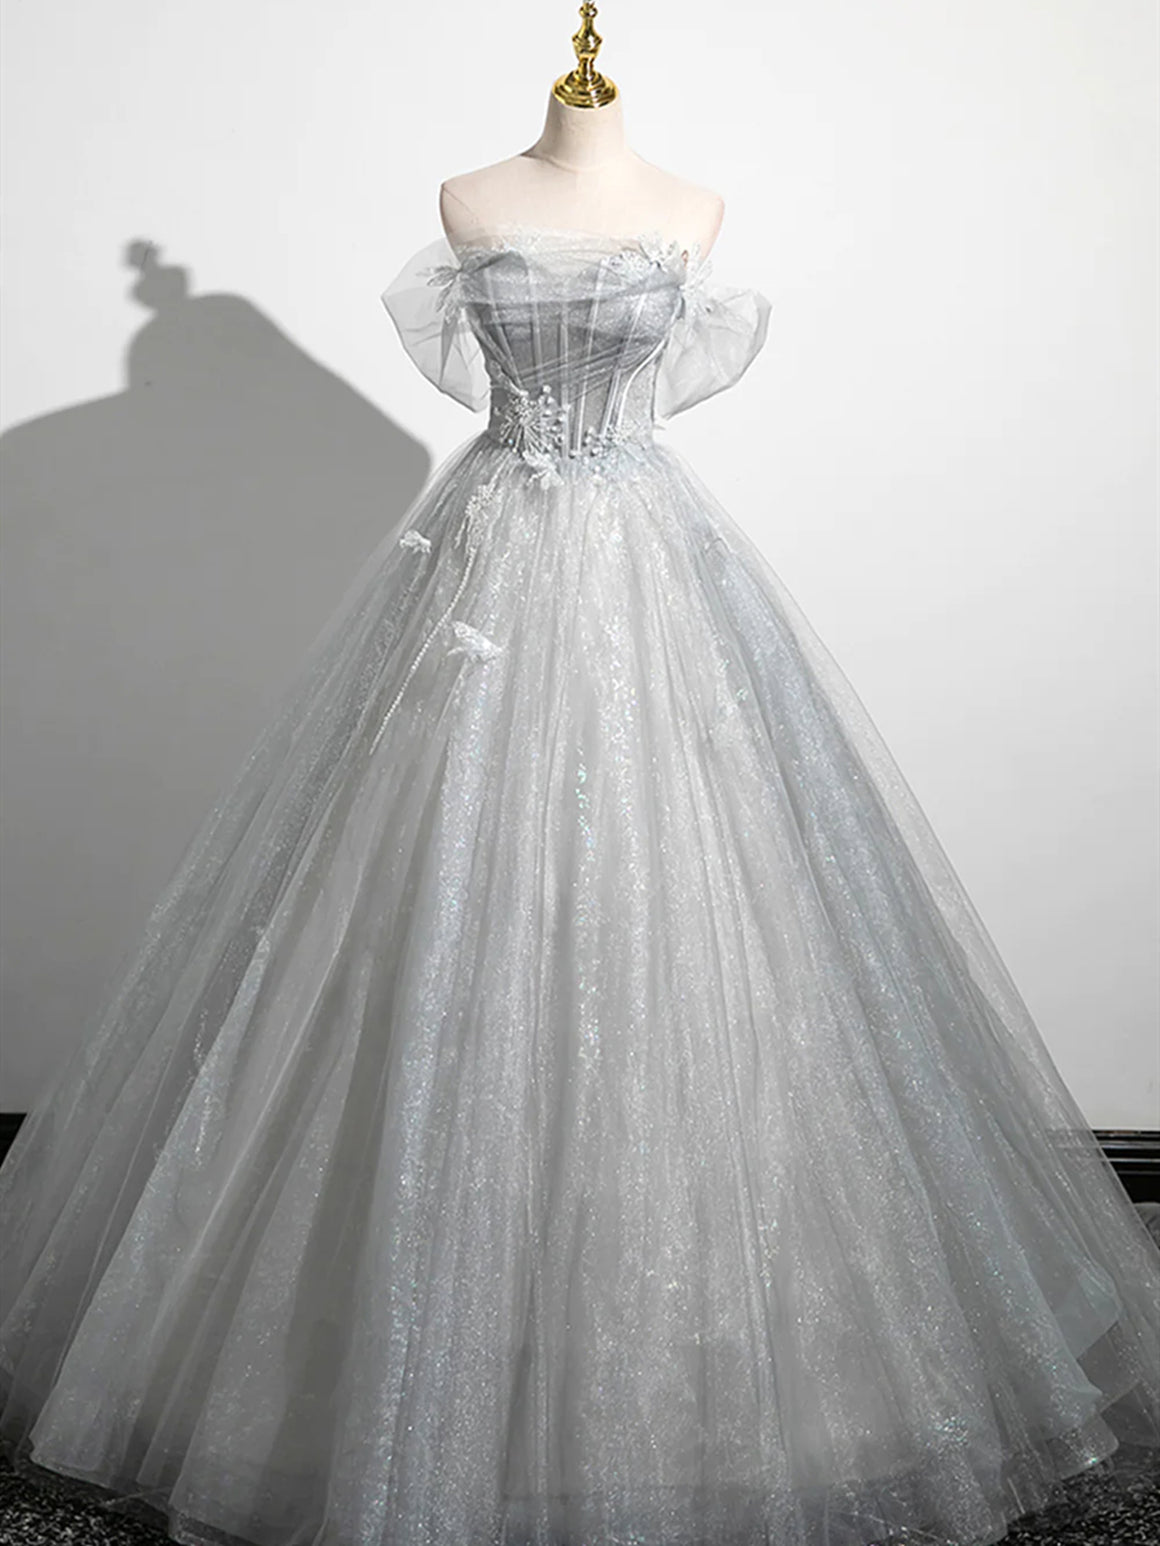 Silver Gray Tulle Lace Prom Dresses, Silver Gray Long Lace Formal Evening Dresses